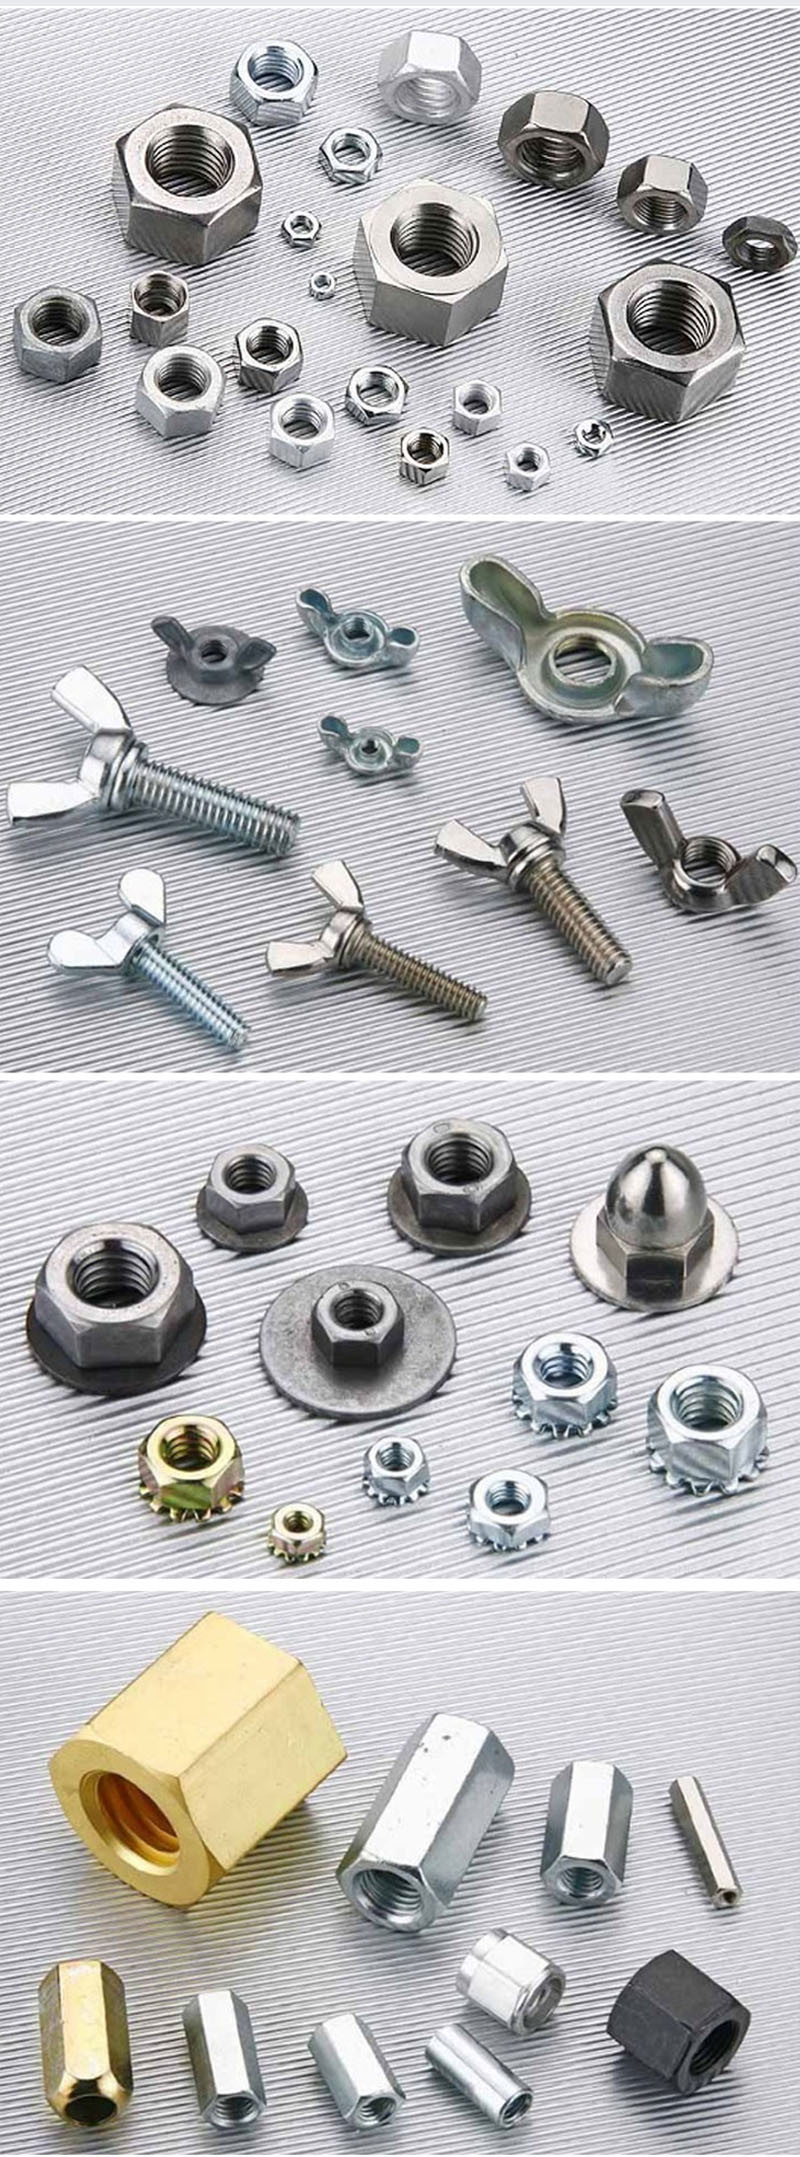 Socket Set Screw with Cone Point